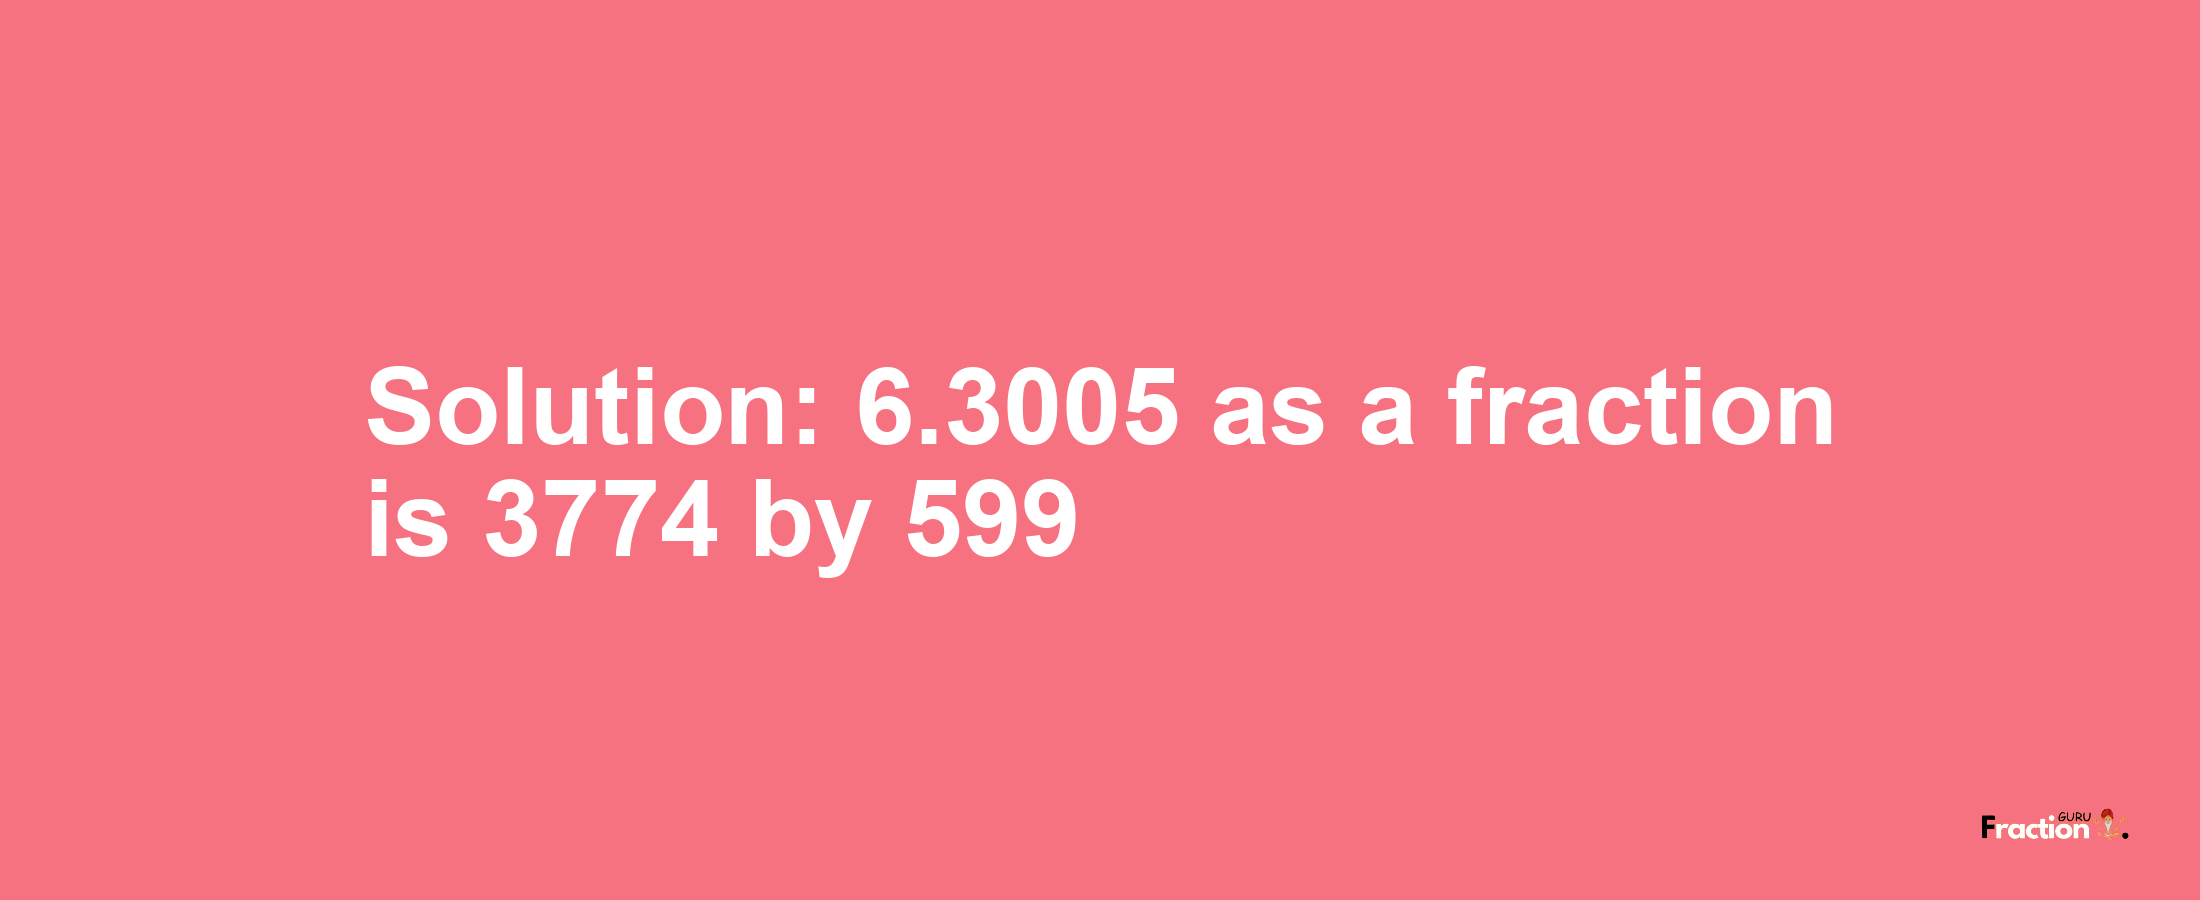 Solution:6.3005 as a fraction is 3774/599